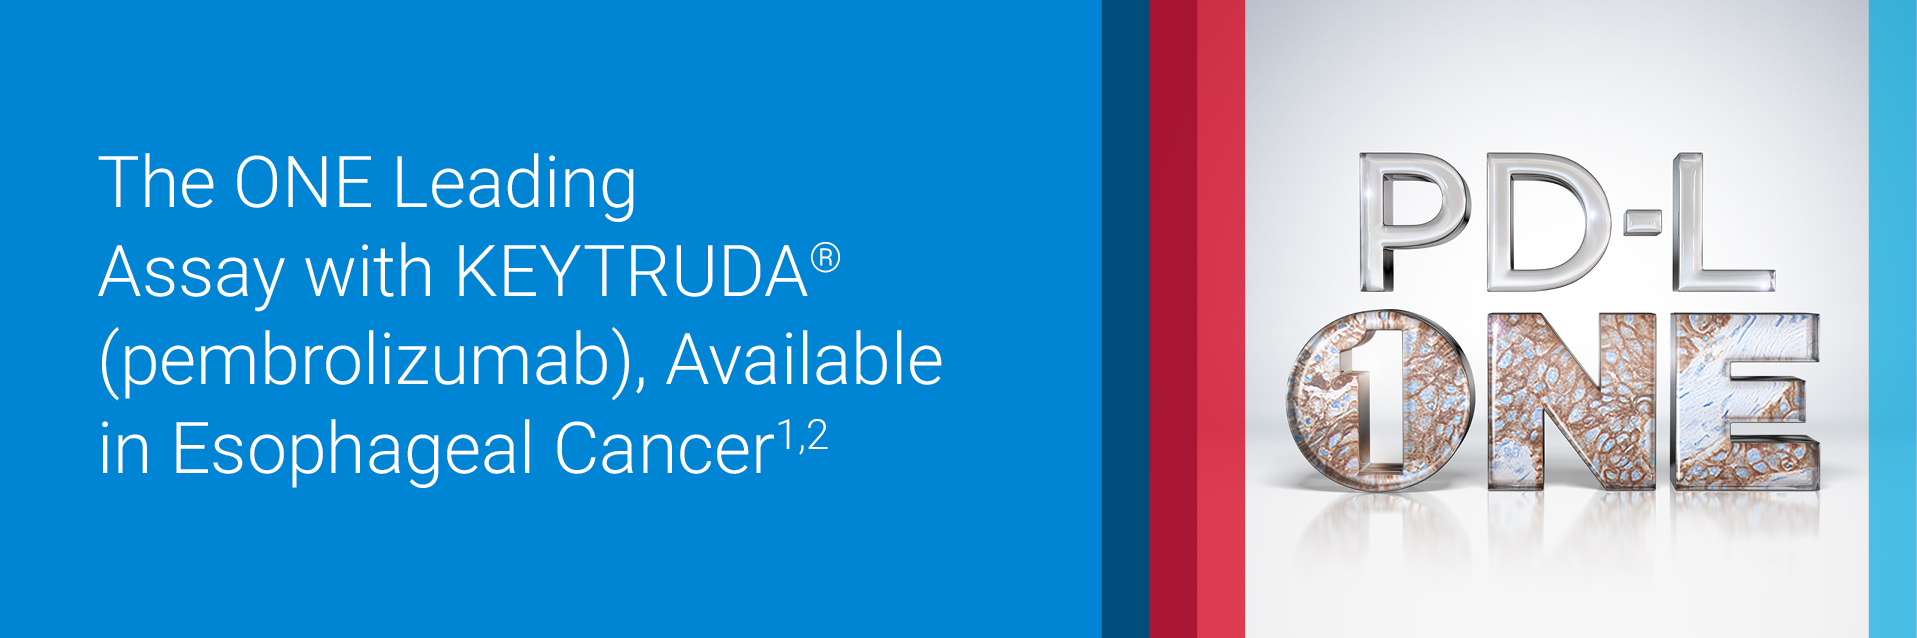 The ONE Leading Assay with KEYTRUDA, Available in Esophageal Cancer